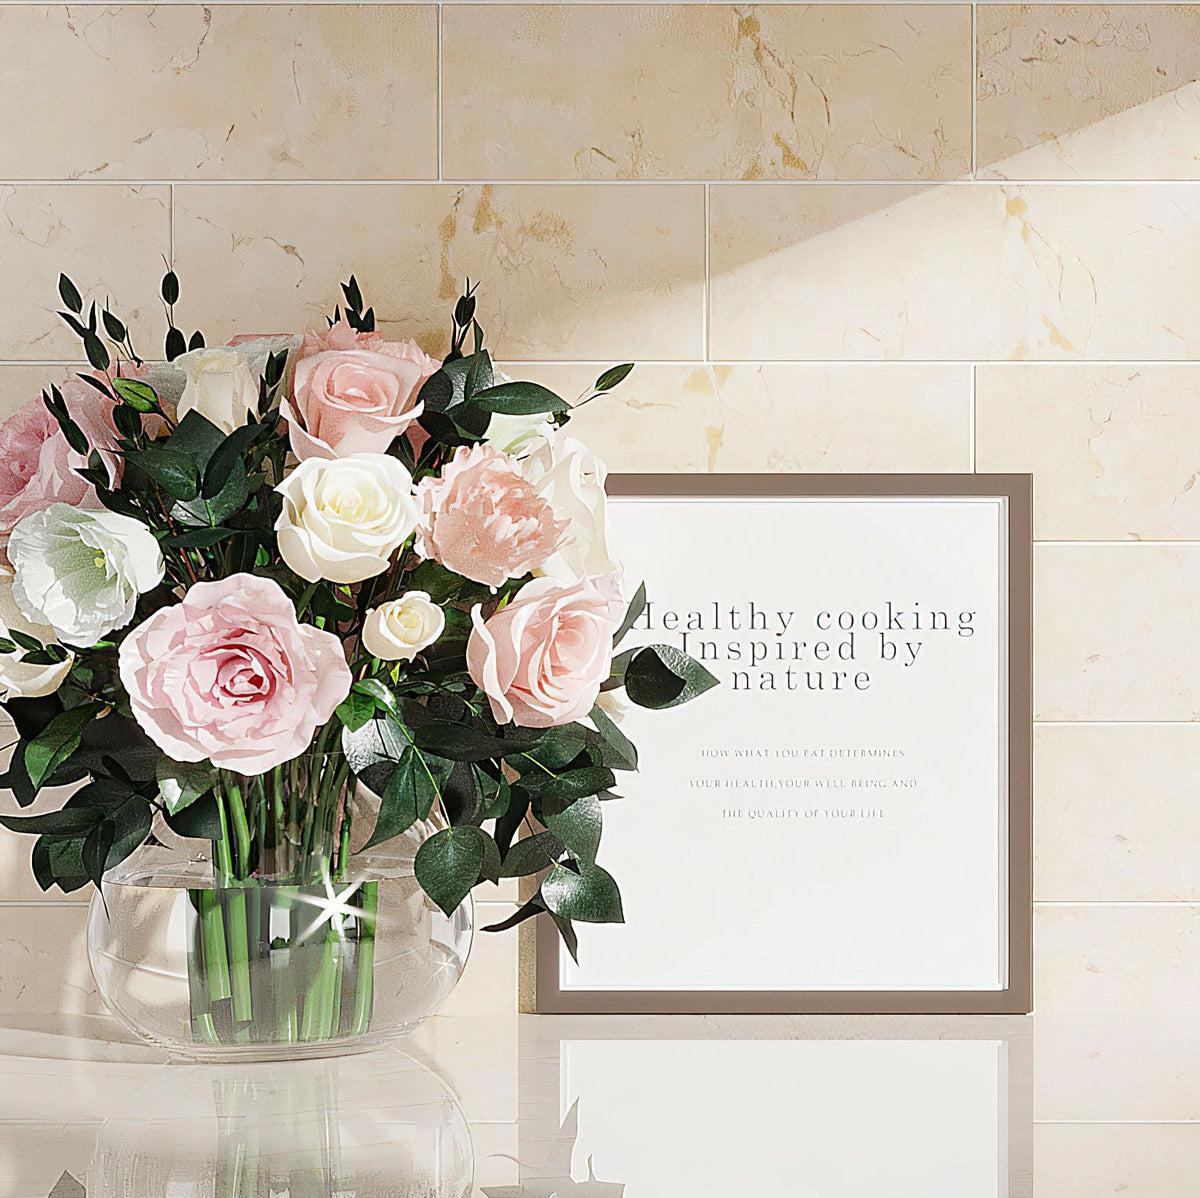 Flowers in a Vase on background of Crema Marfil Marble Subway Tile Backsplash in Sunlight